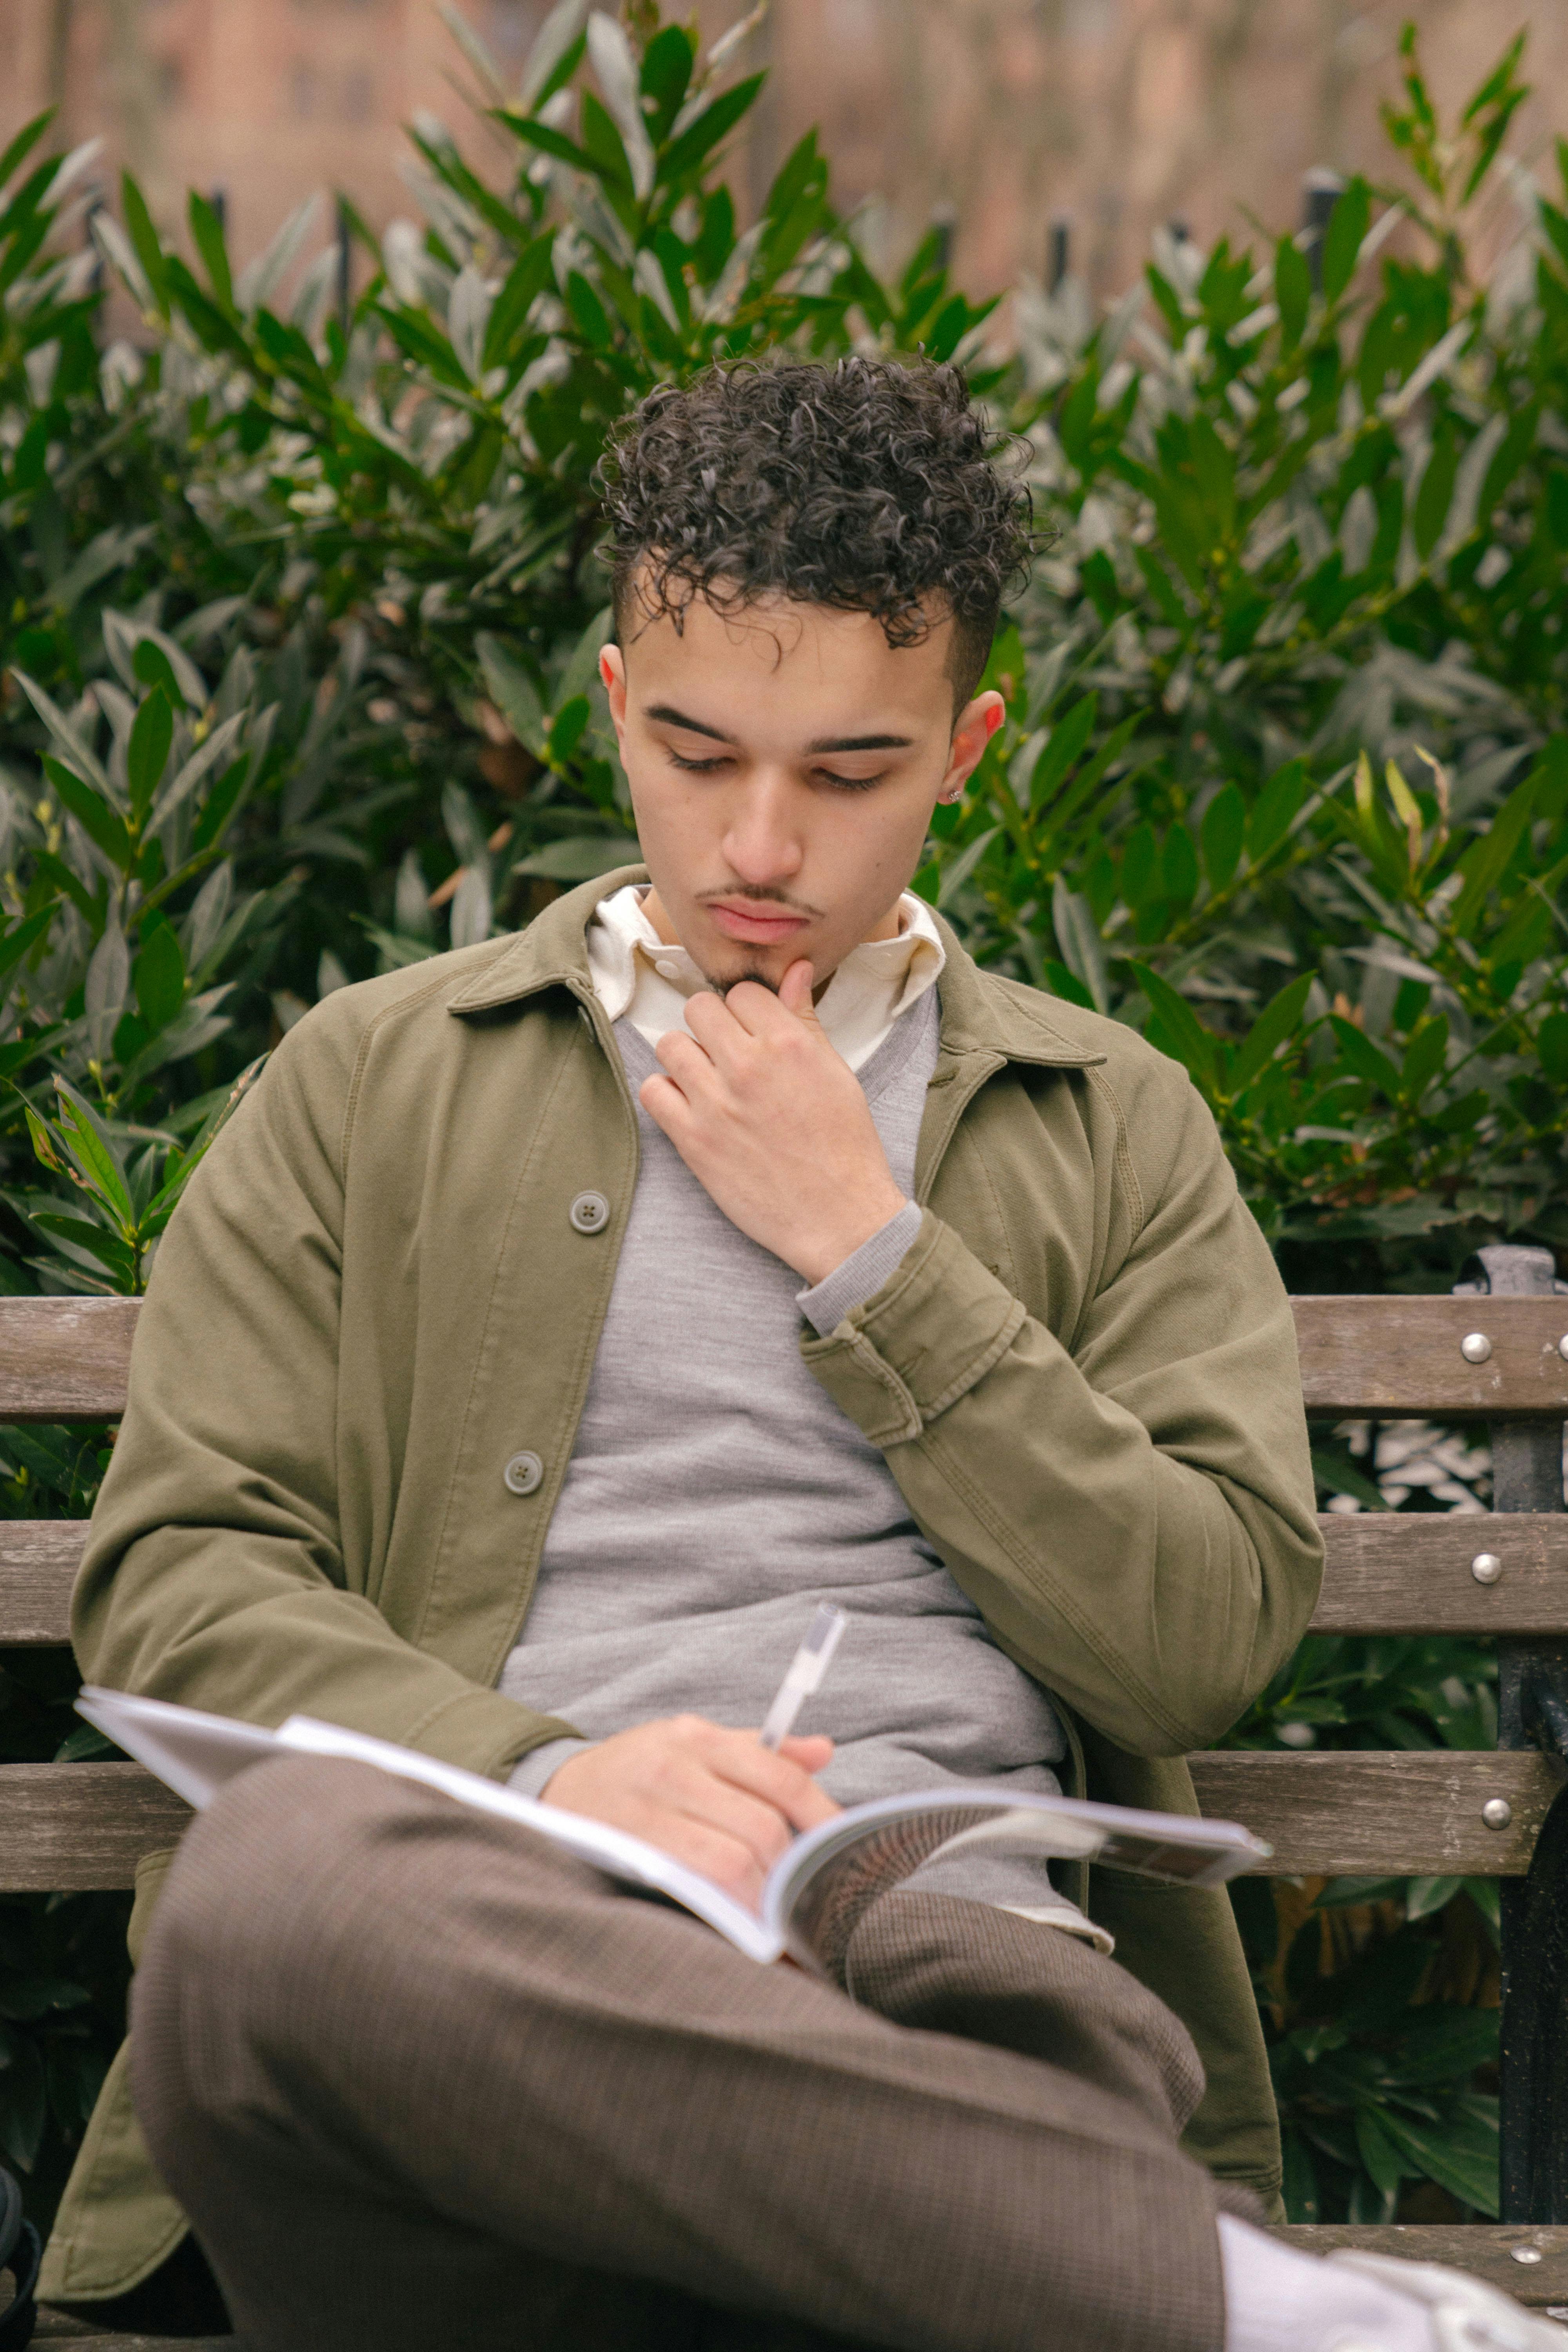 pensive ethnic male reading book on bench